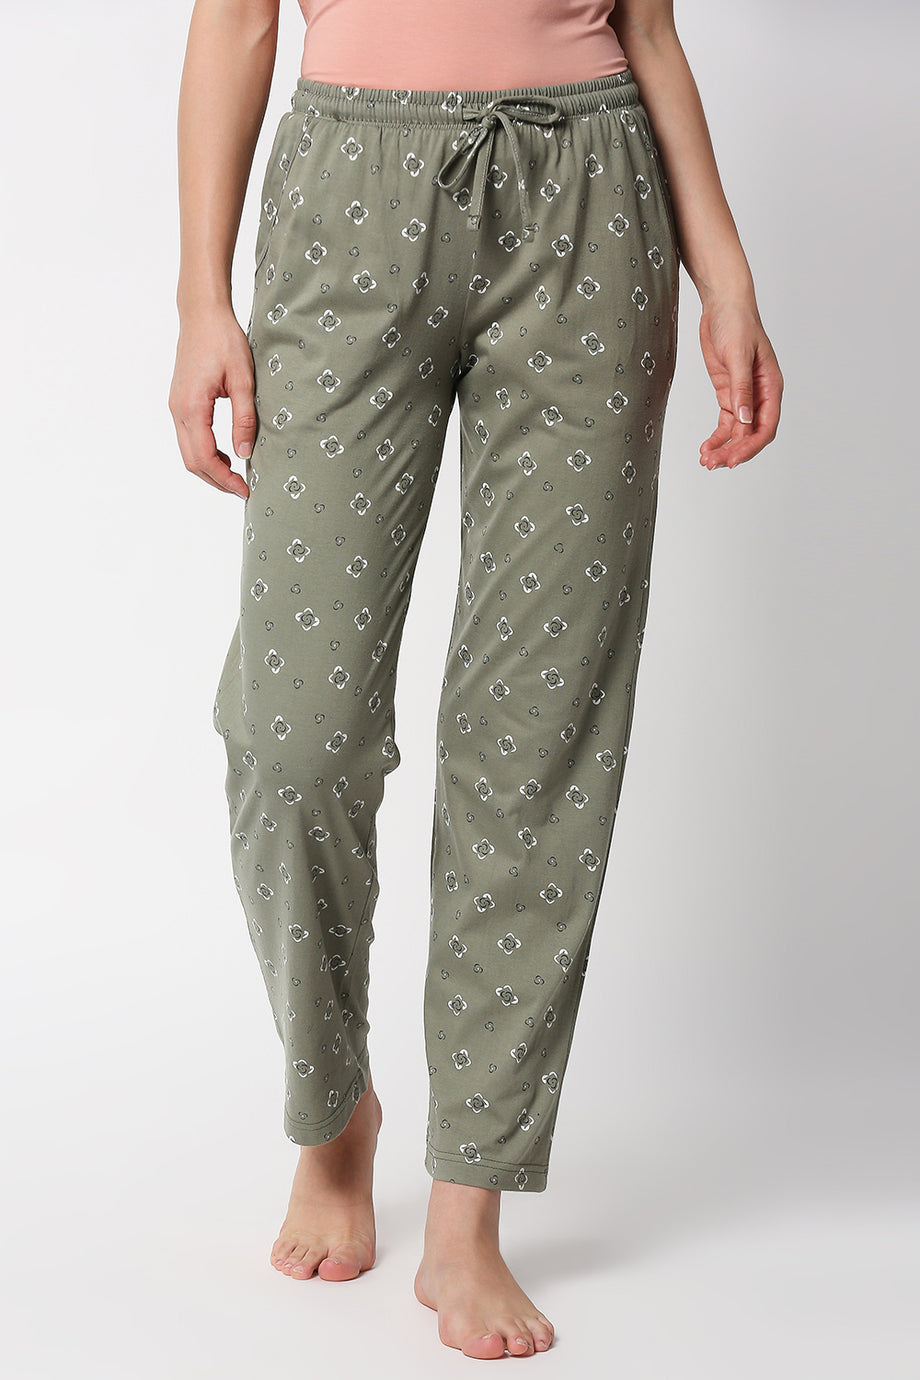 Wuxi Relaxed Women Multicolor Trousers - Buy Wuxi Relaxed Women Multicolor Trousers  Online at Best Prices in India | Flipkart.com